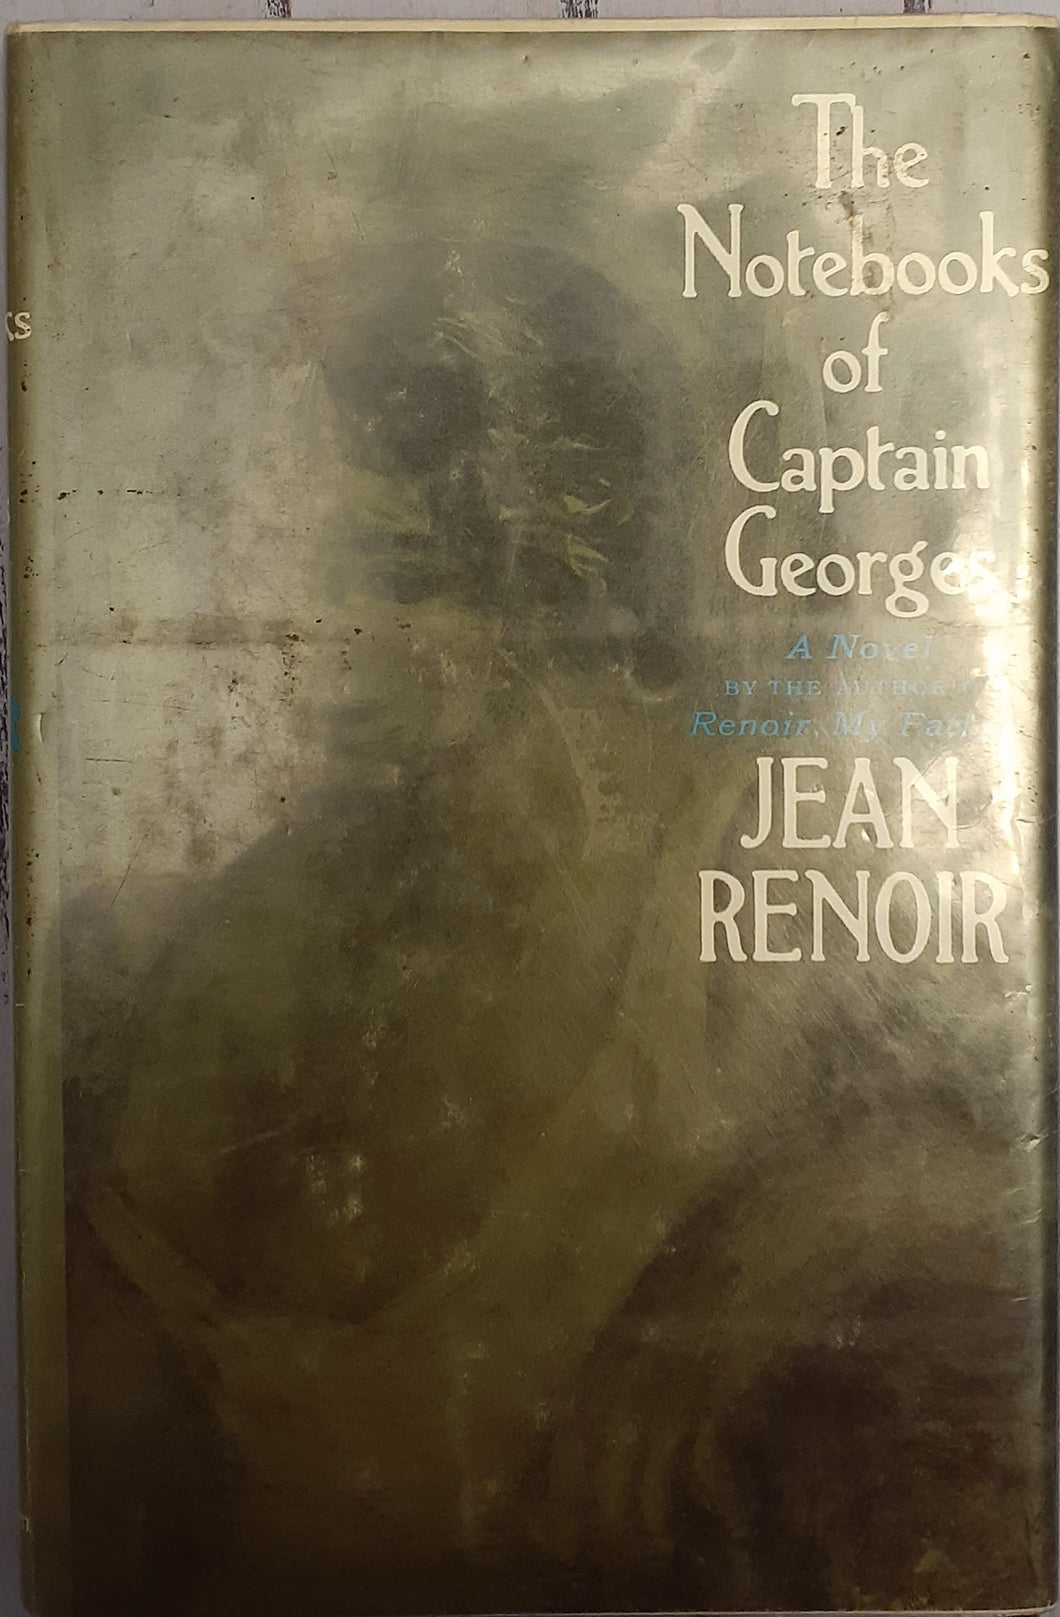 The Notebooks of Captain Georges